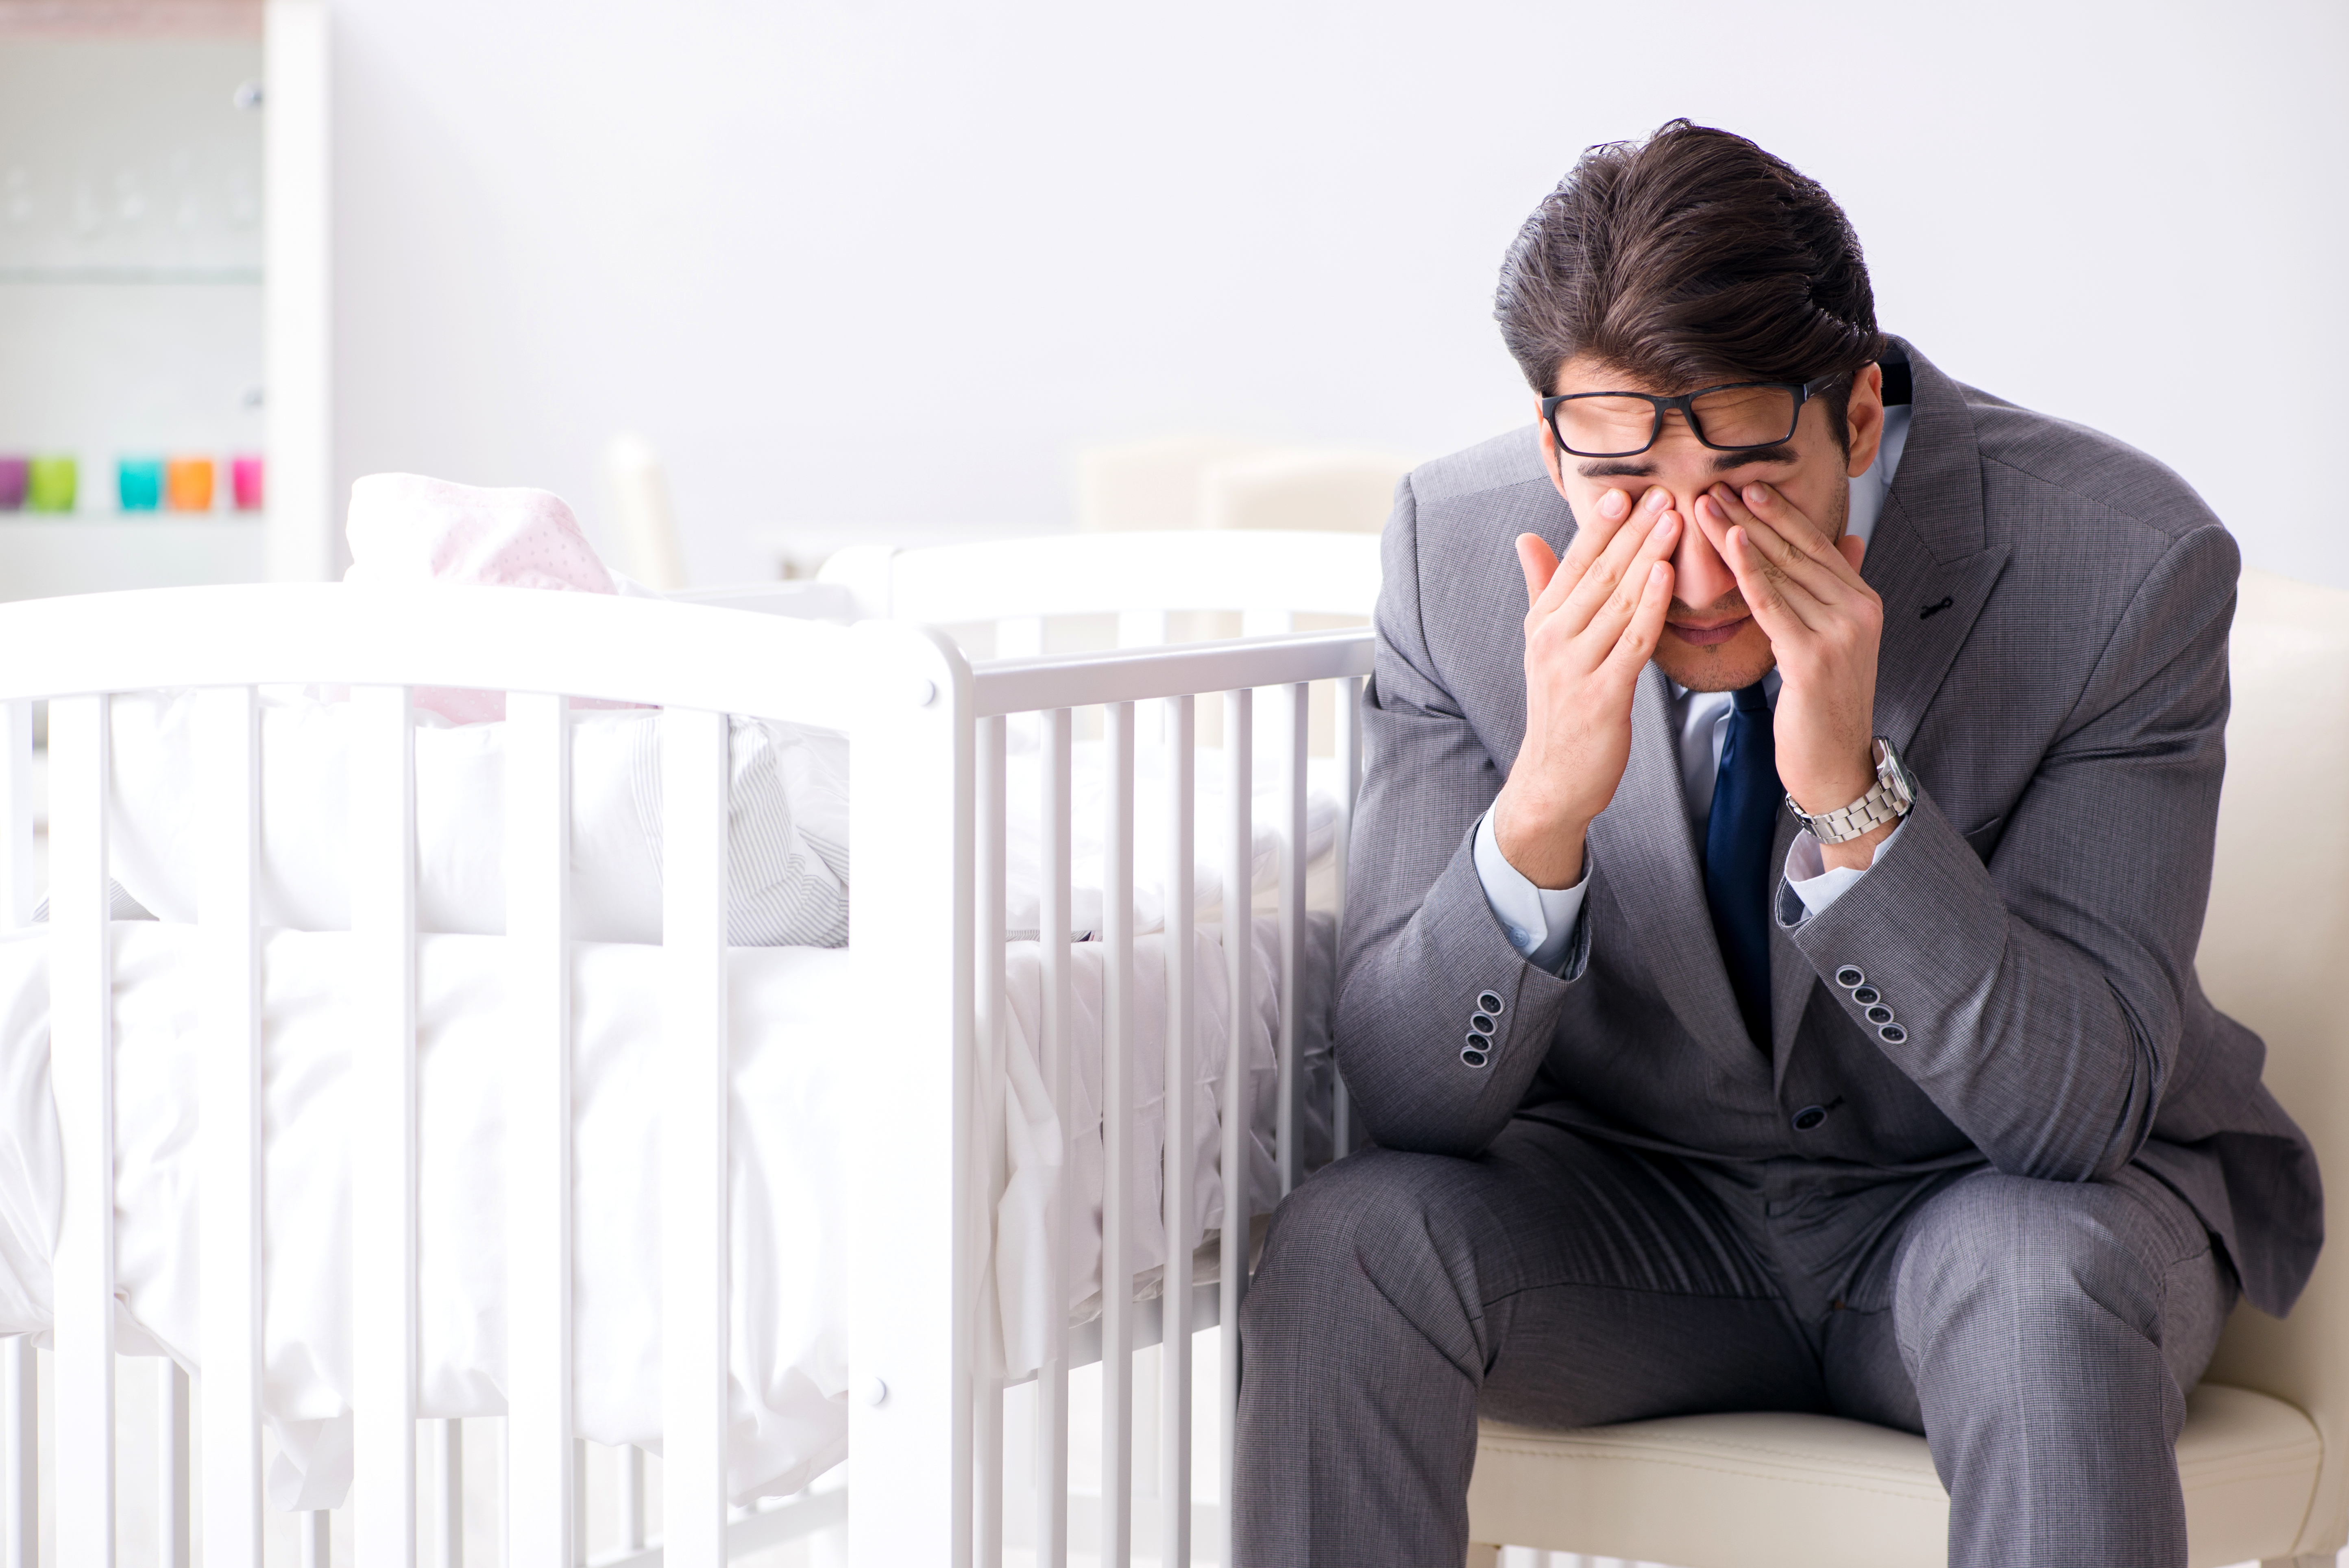 A man crying while sitting next to an empty baby cot | Source: Shutterstock